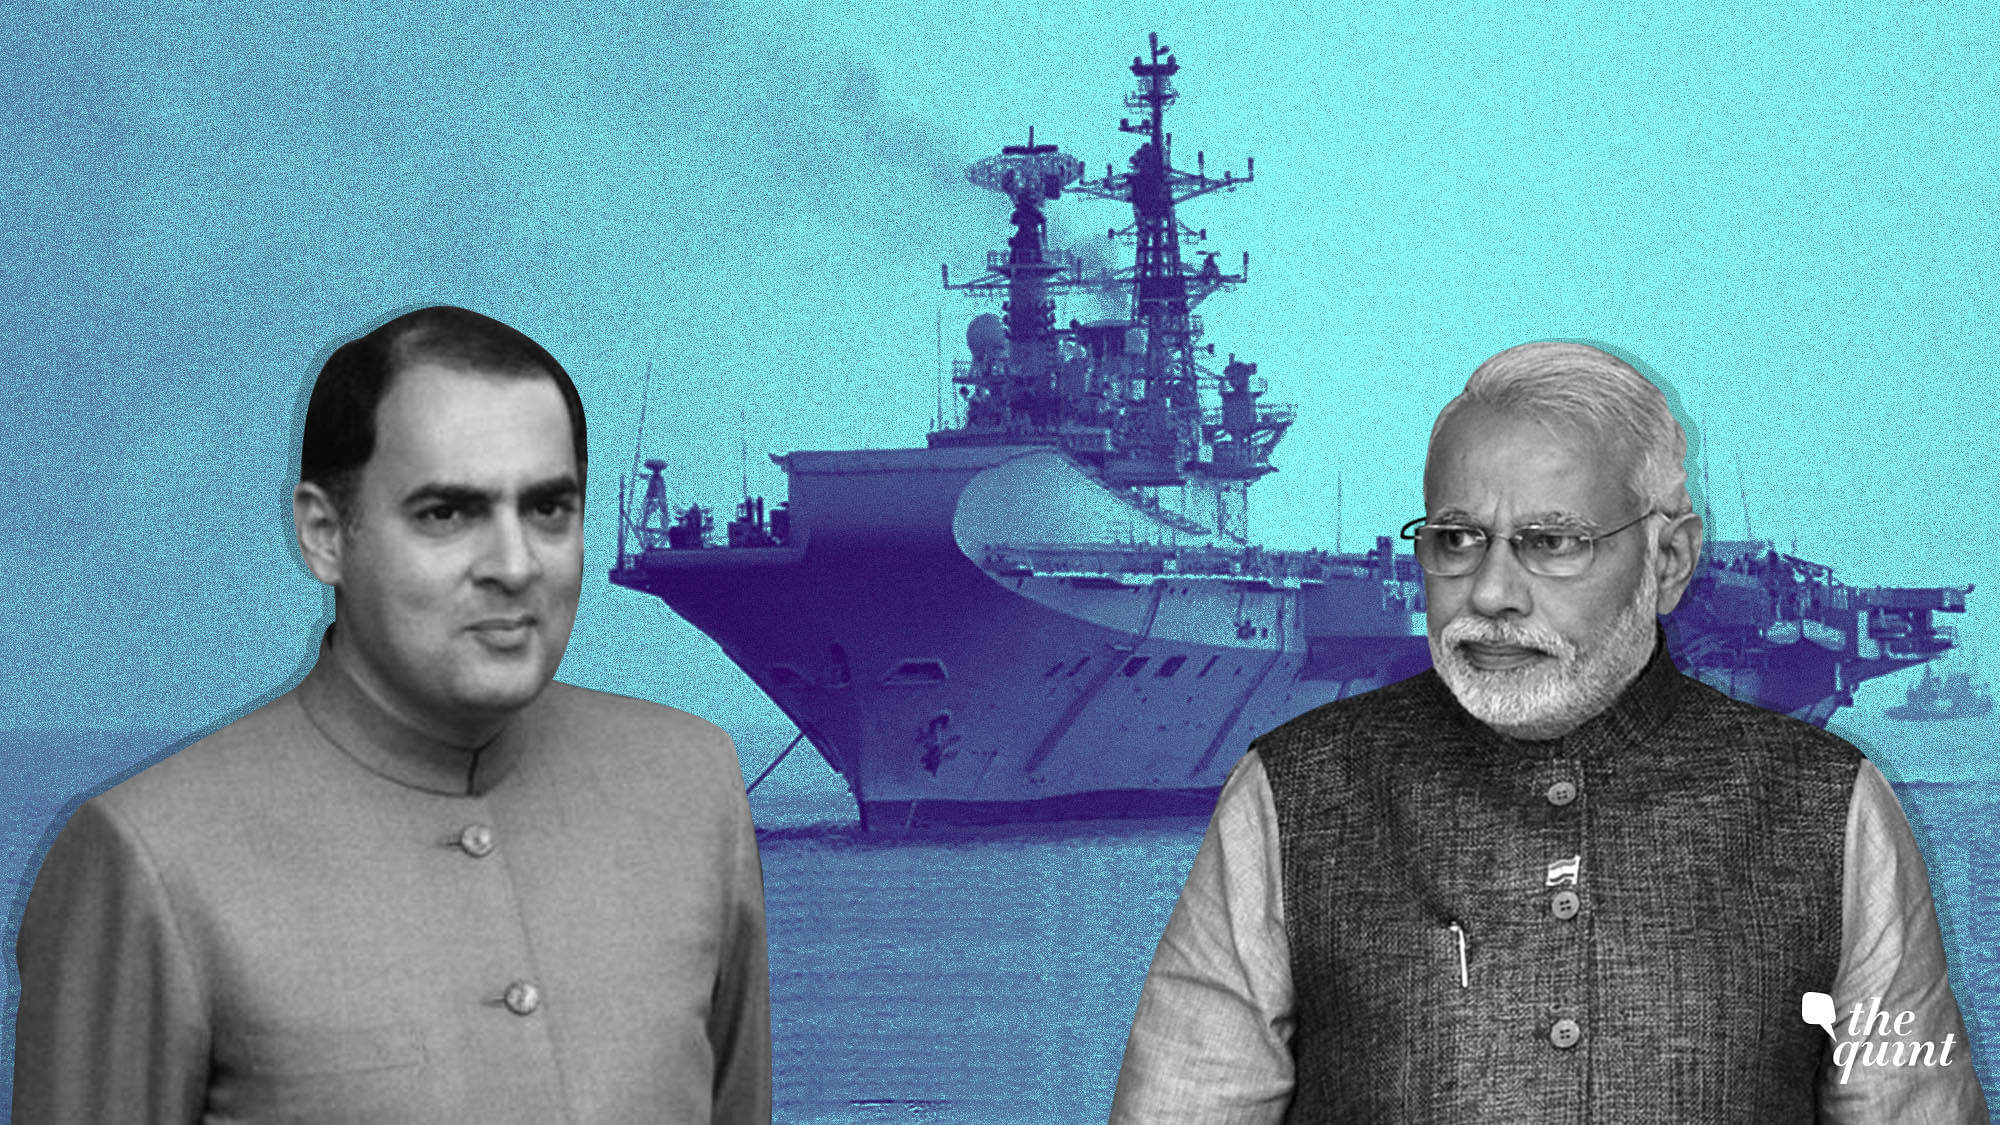 PM Modi also claimed that after picking up former Prime Minister Rajiv Gandhi and his family, INS Viraat halted at an island for 10 days.